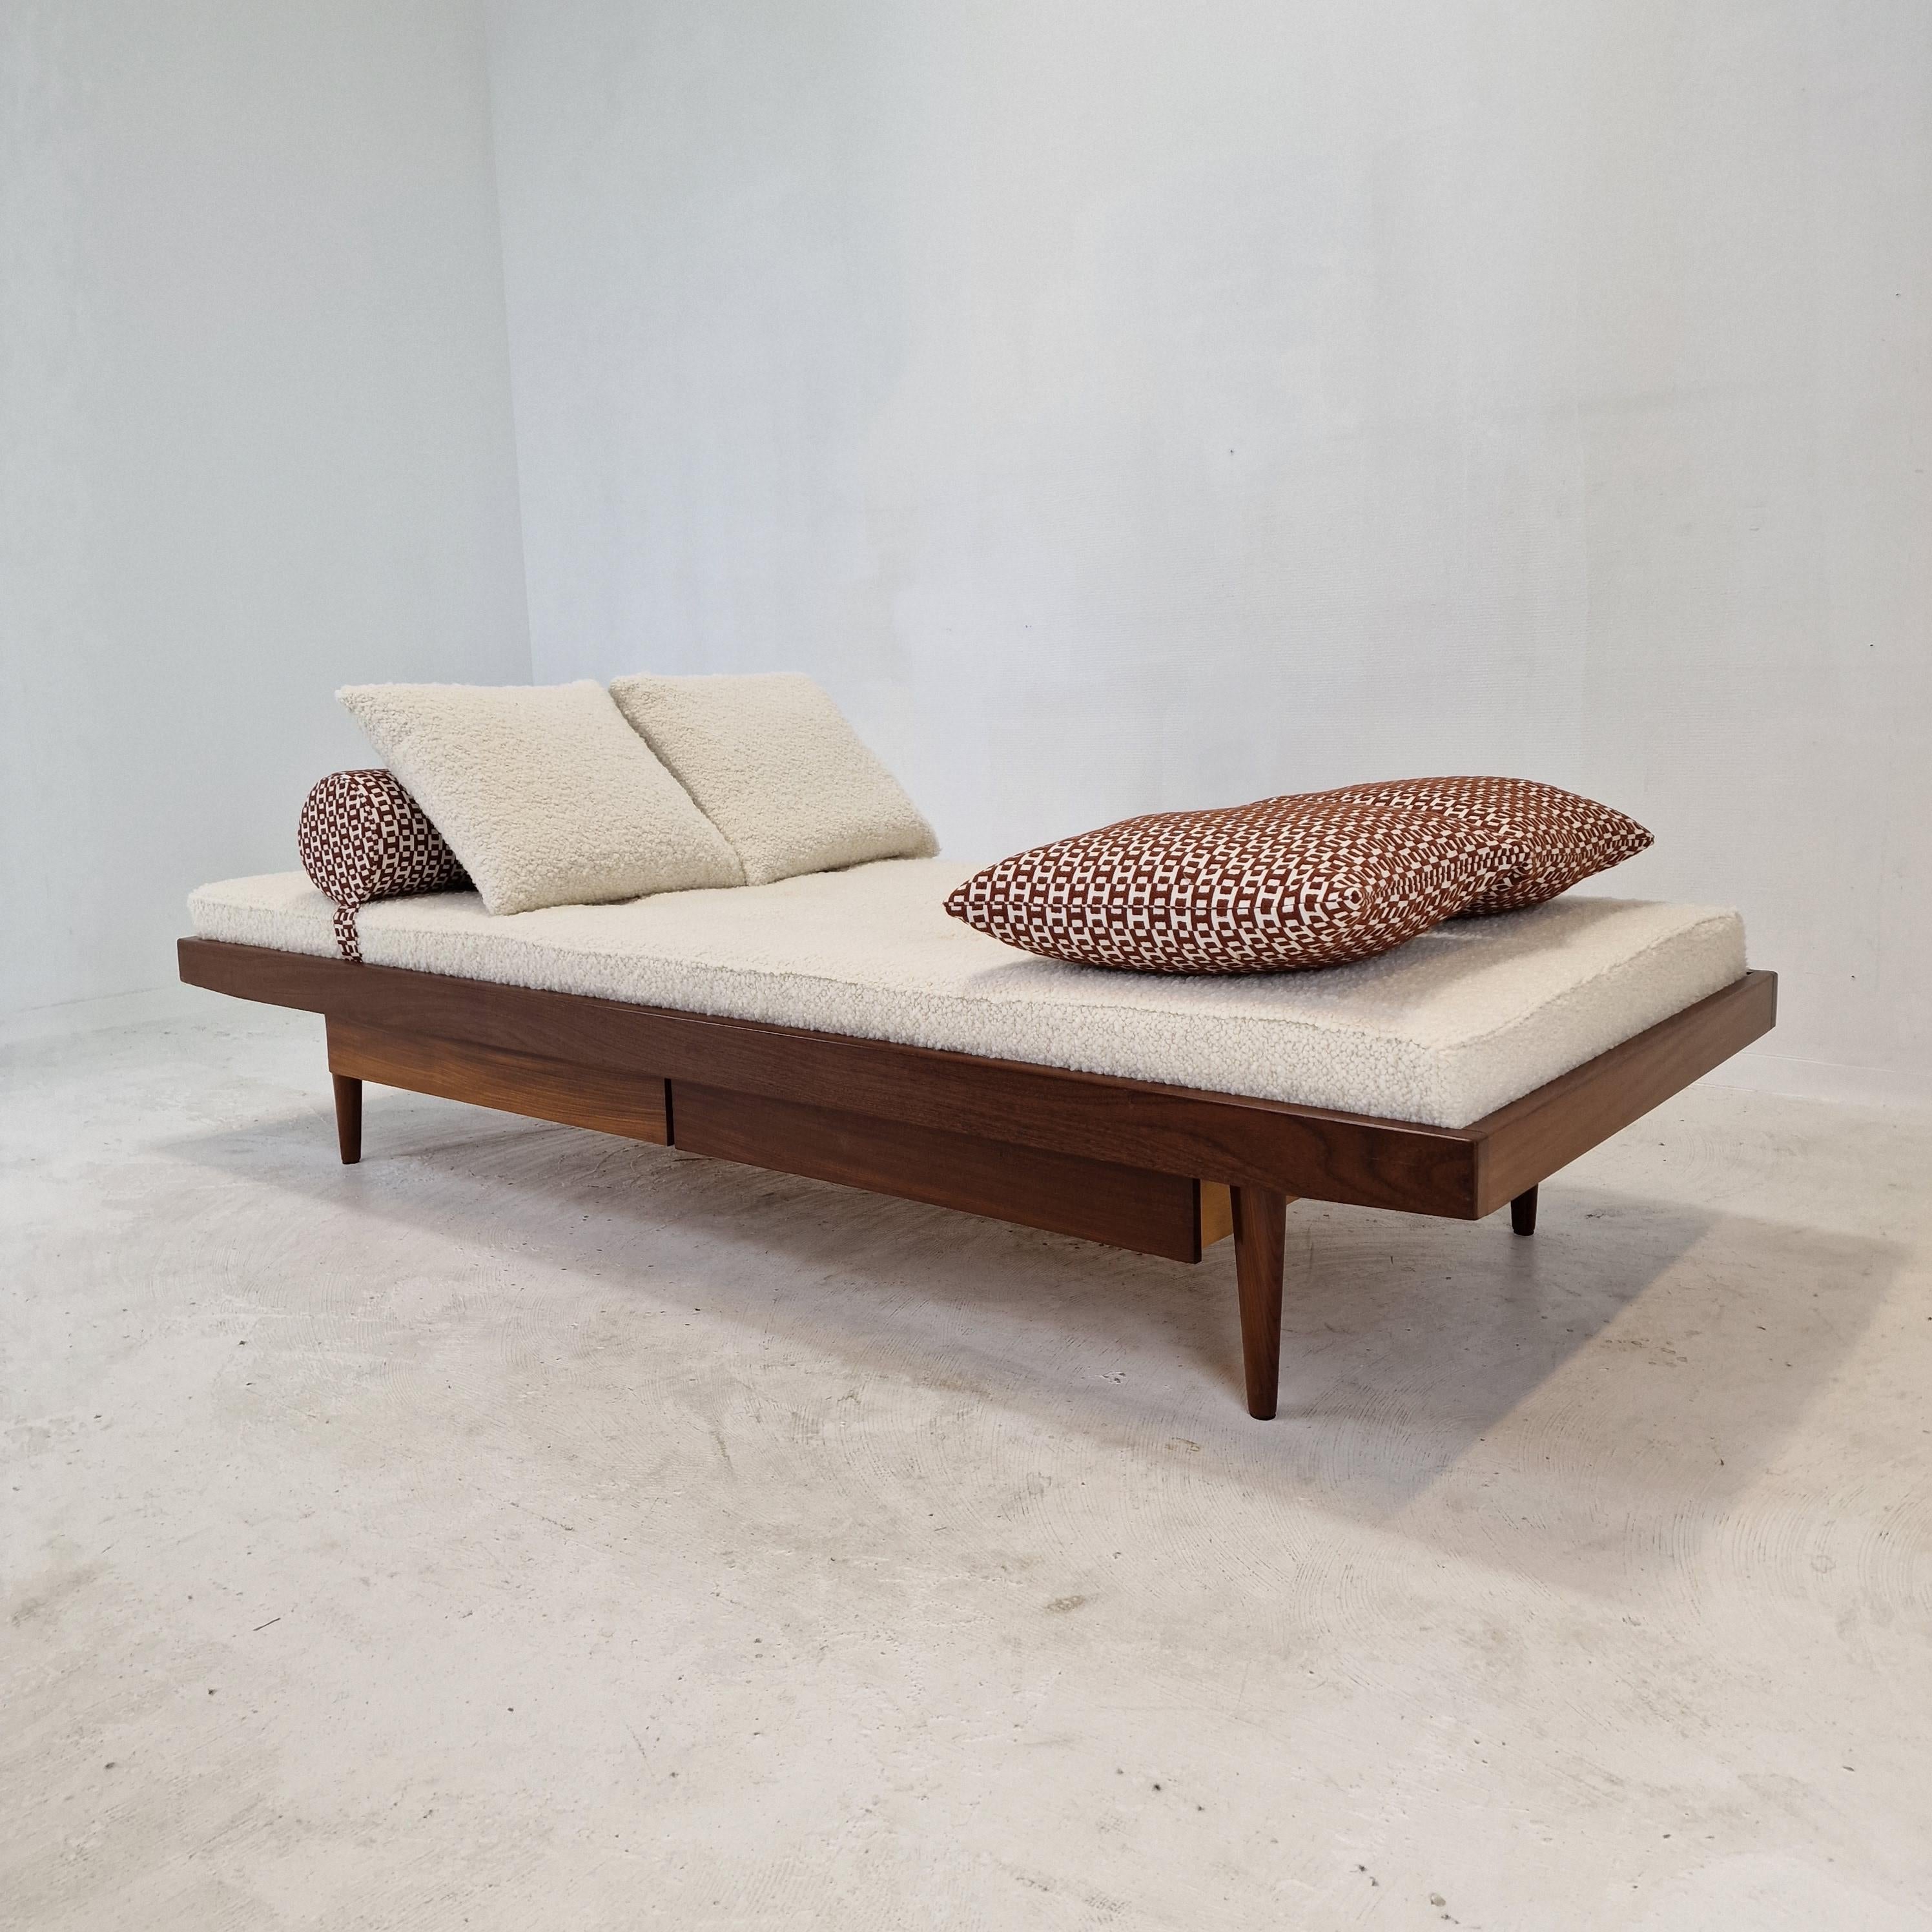 Teak Daybed with Hermes Cushions and Bolster, 1960s For Sale 3